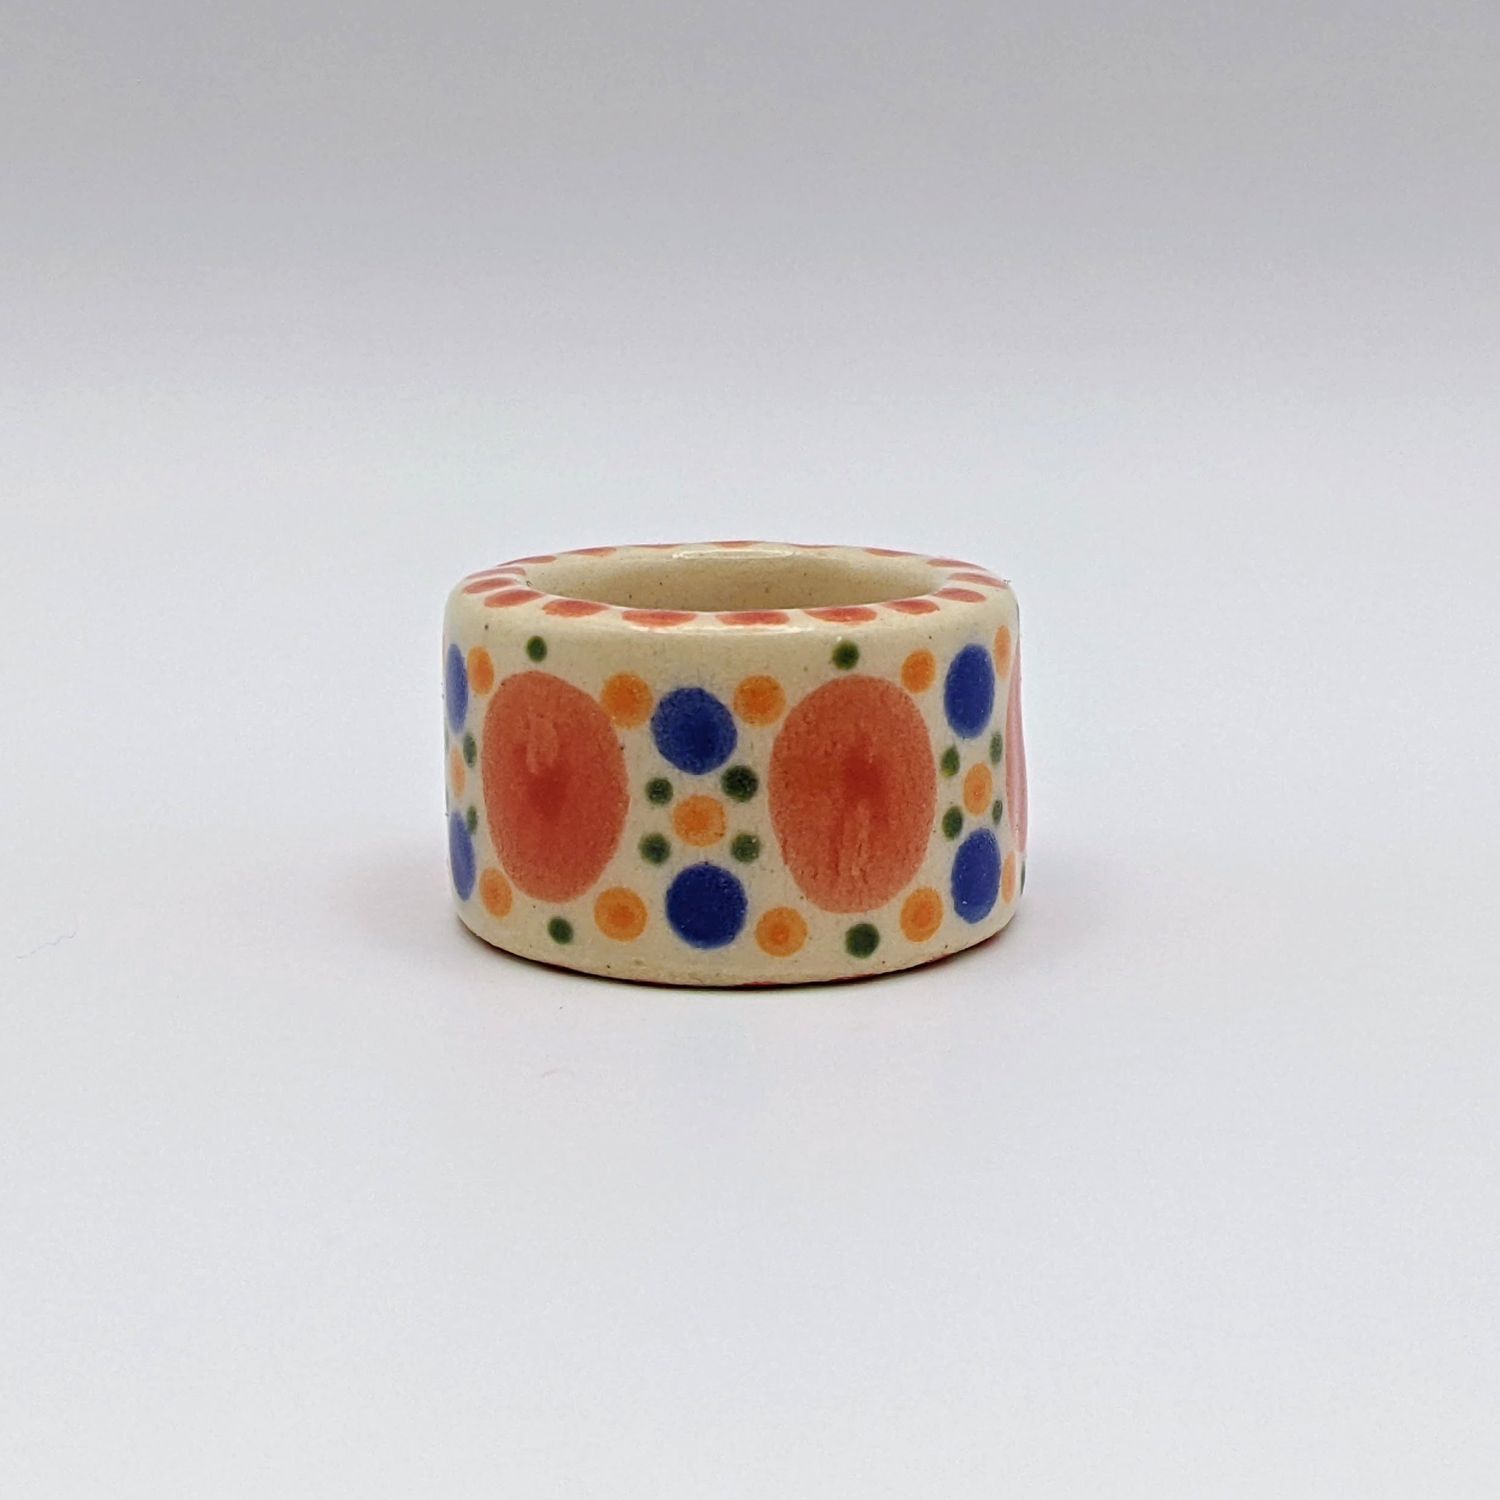 Here and Here: Blue and Orange Dot Ceramic Ring – Medium Product Image 1 of 2